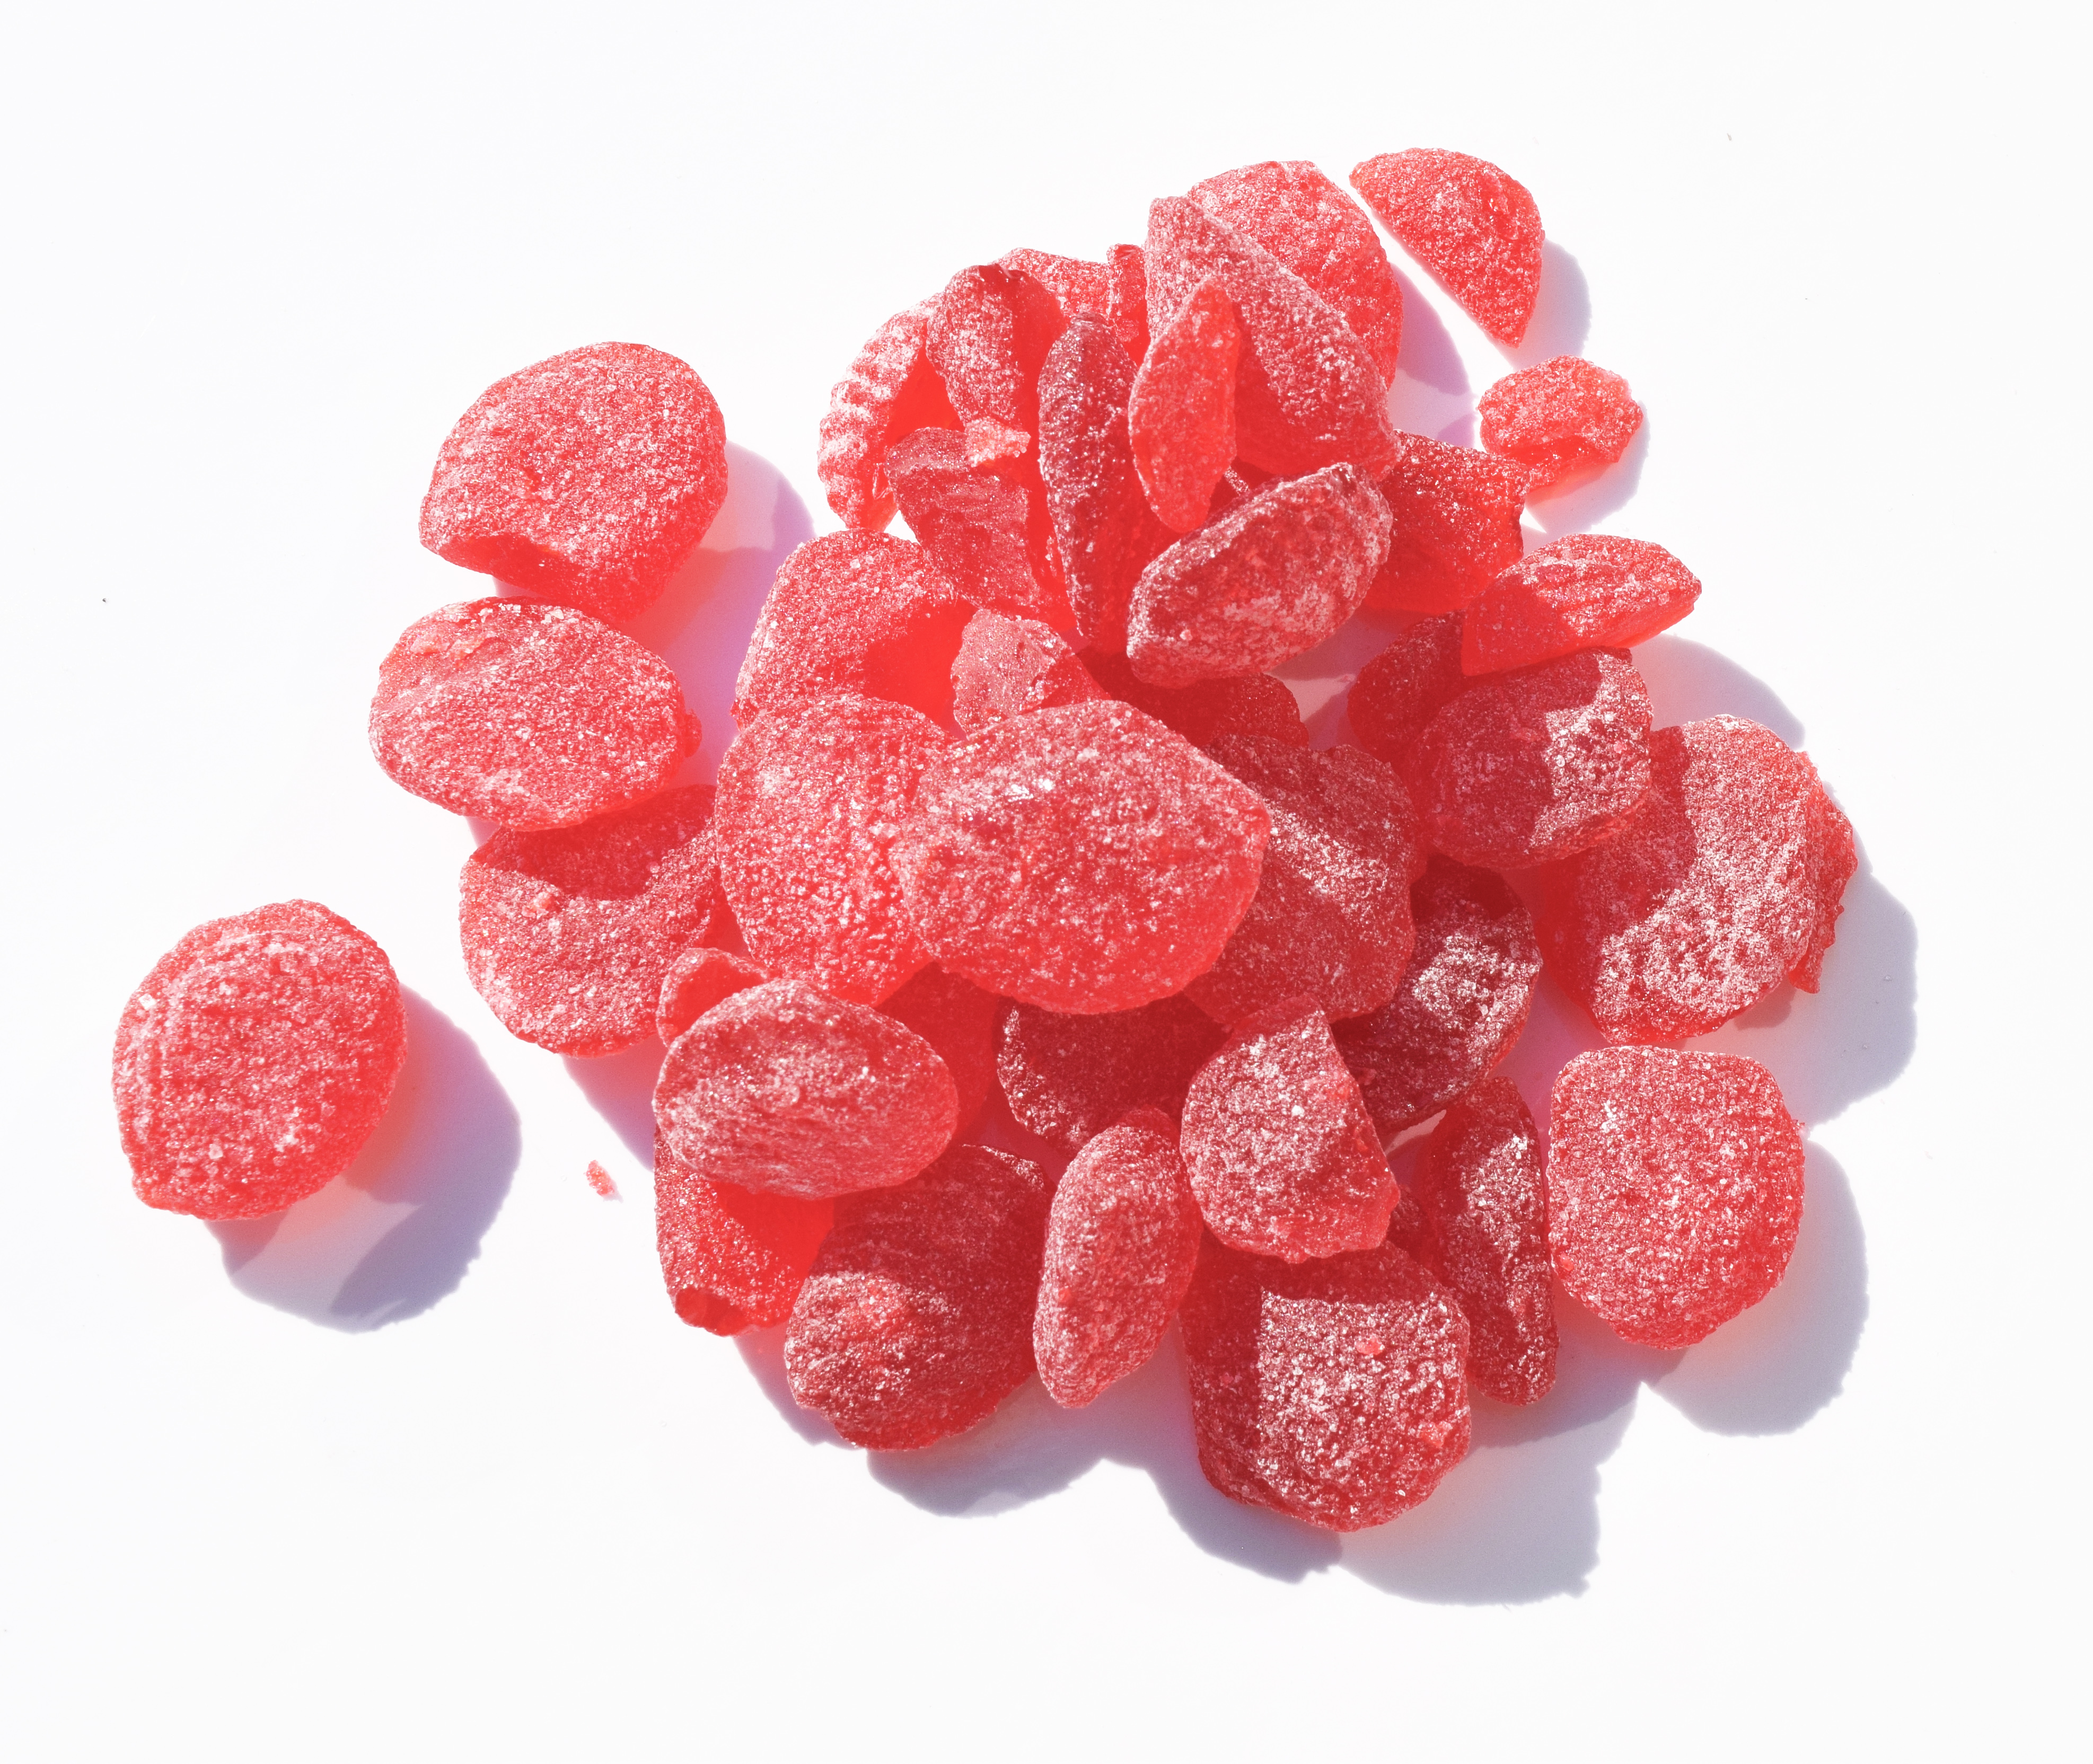 Peach Stones - History of Candies from True Treats Historic Candy ...